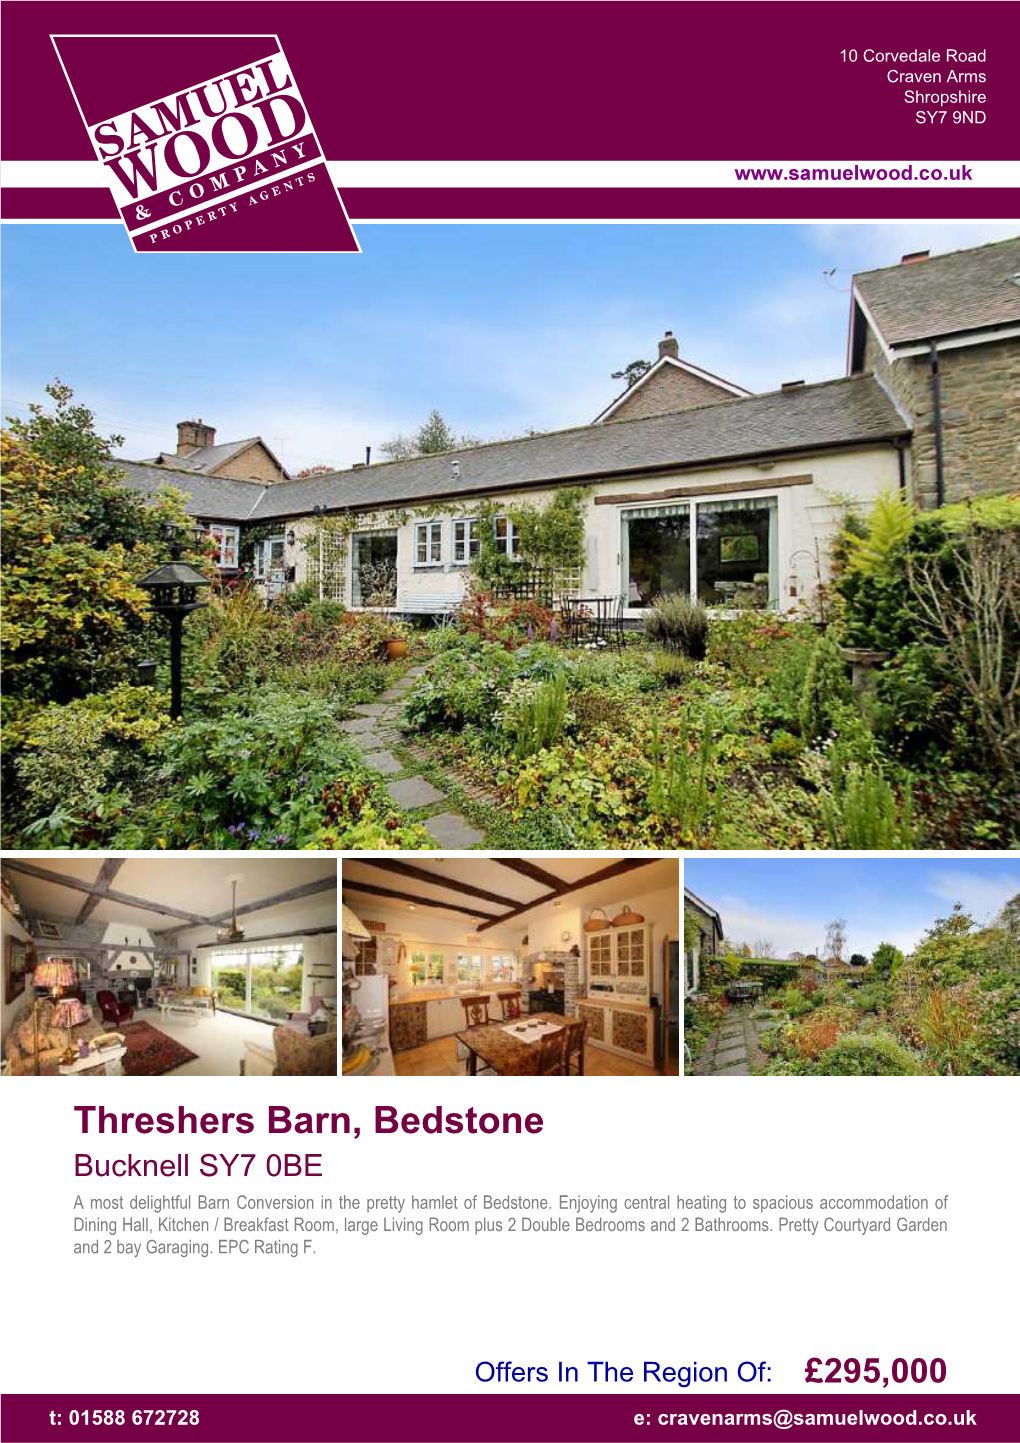 Threshers Barn, Bedstone Bucknell SY7 0BE a Most Delightful Barn Conversion in the Pretty Hamlet of Bedstone